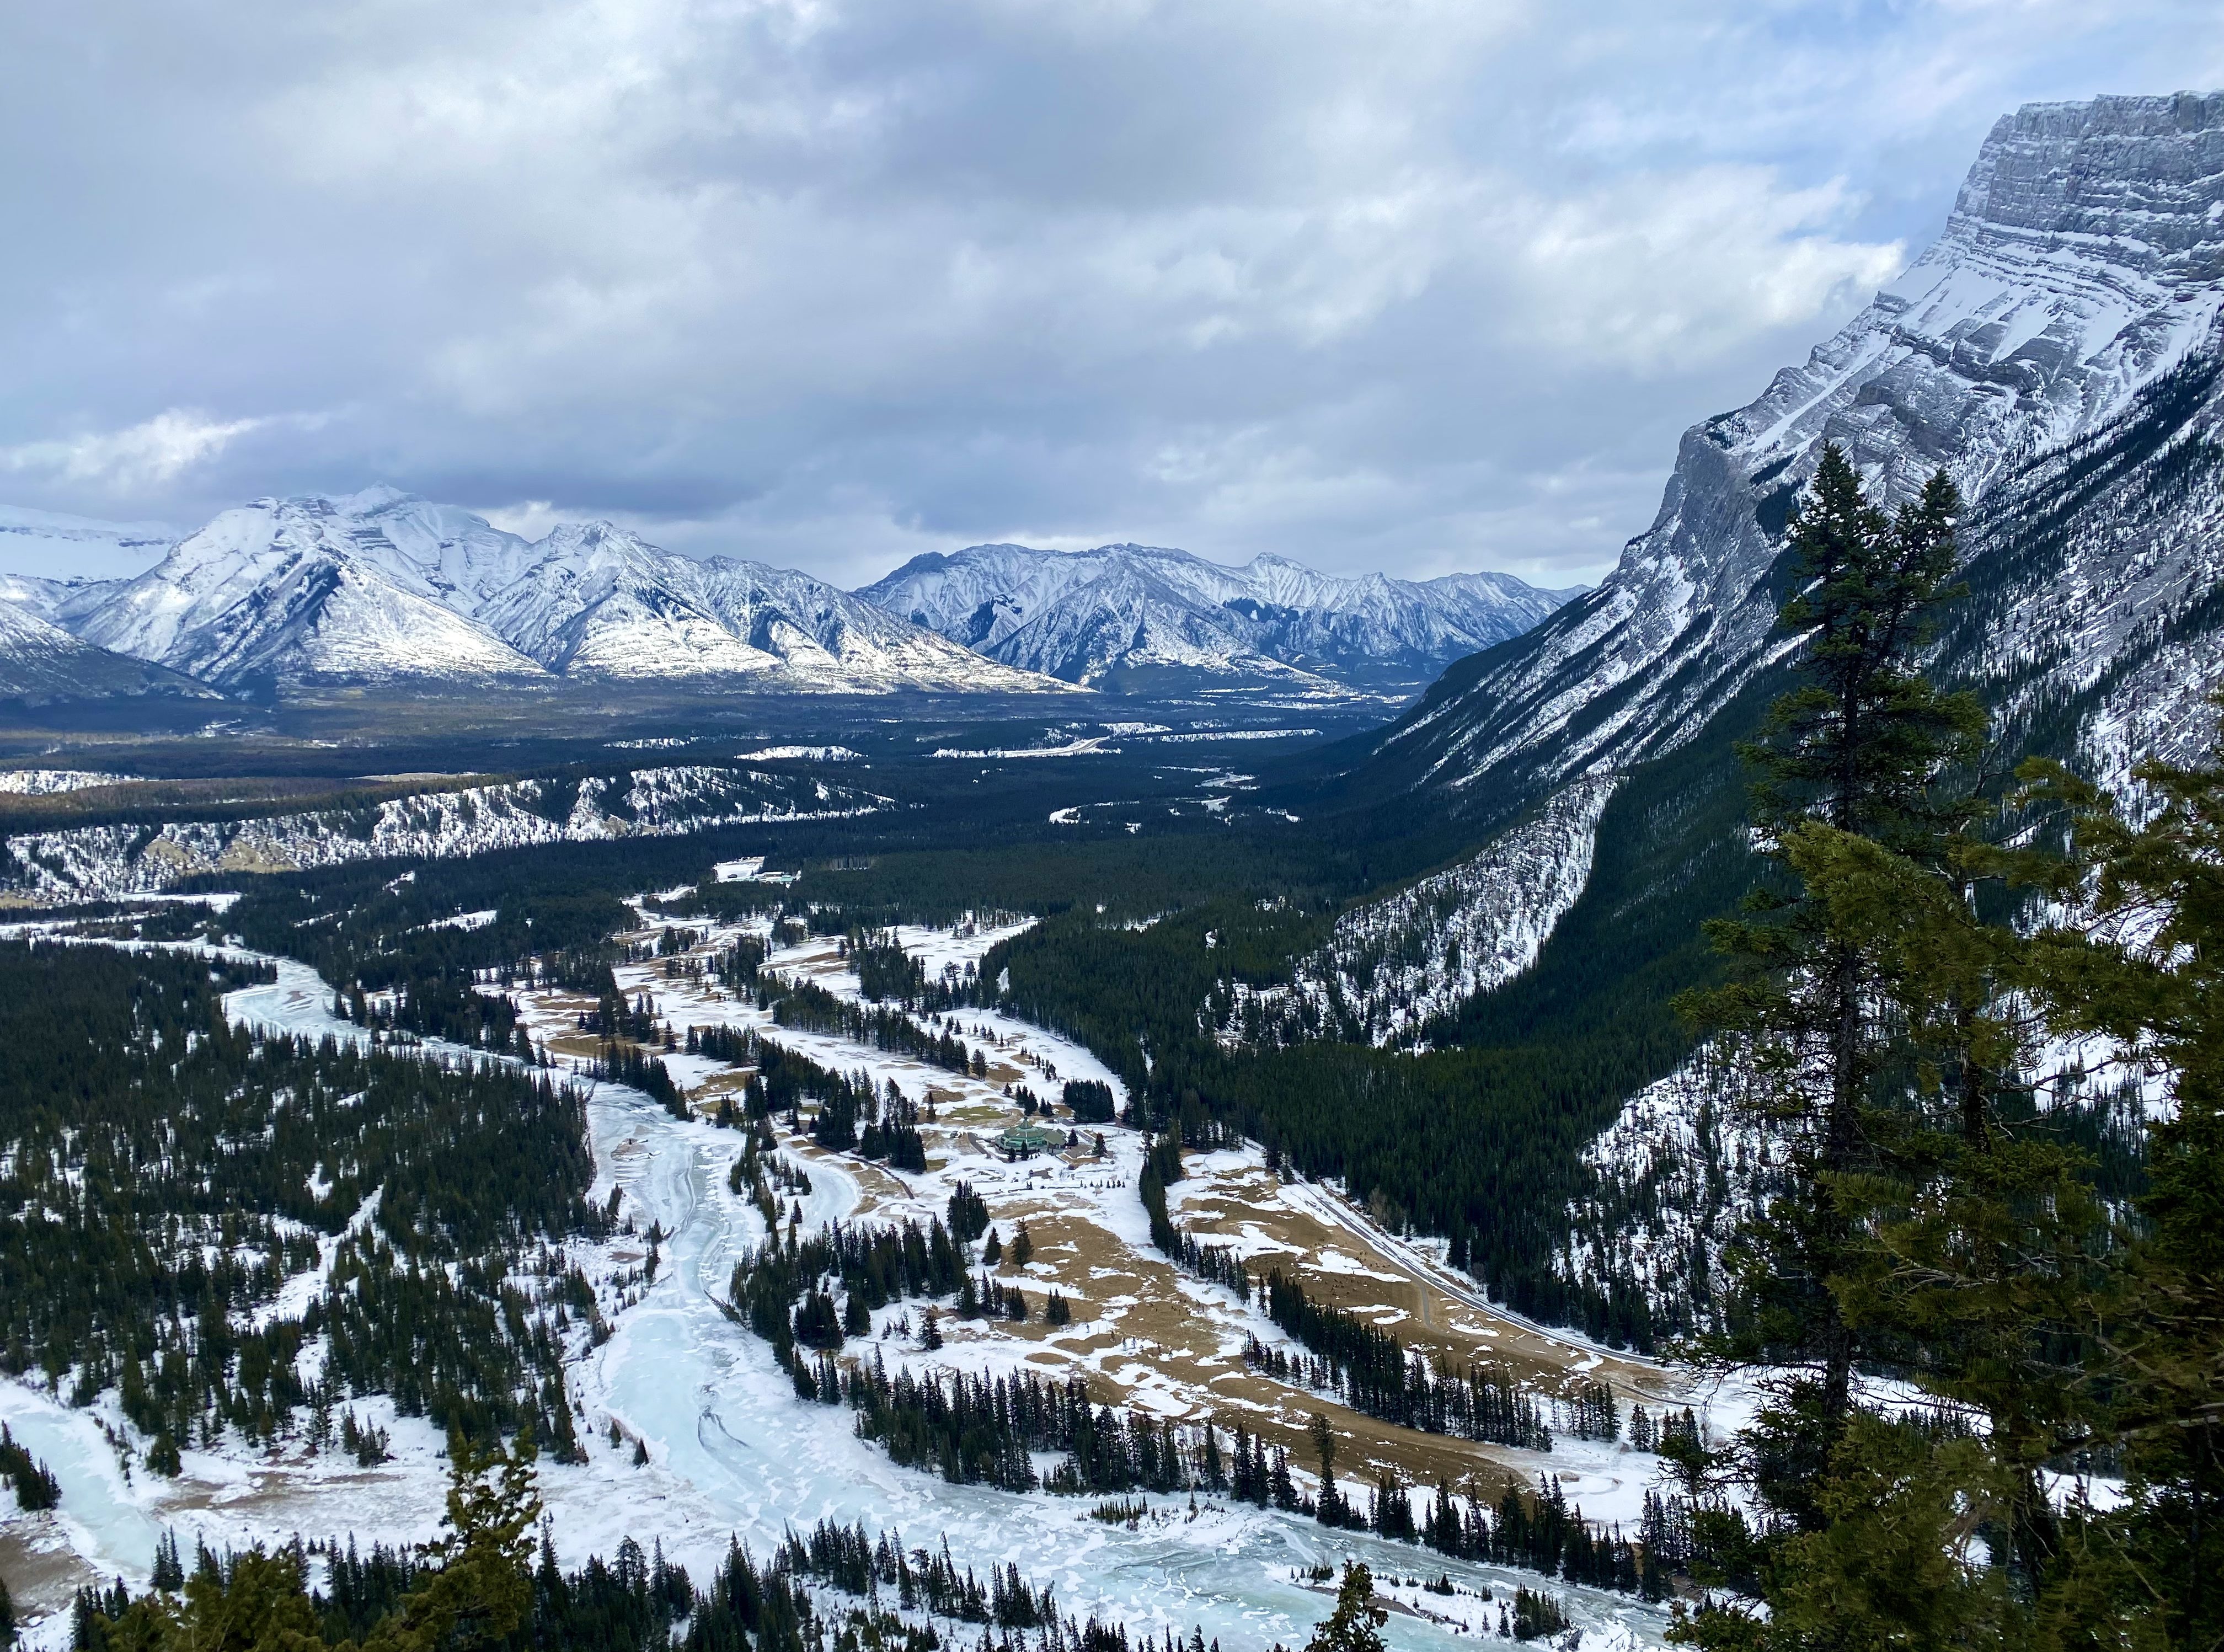 Photo: The view from Tunnel Mountain.